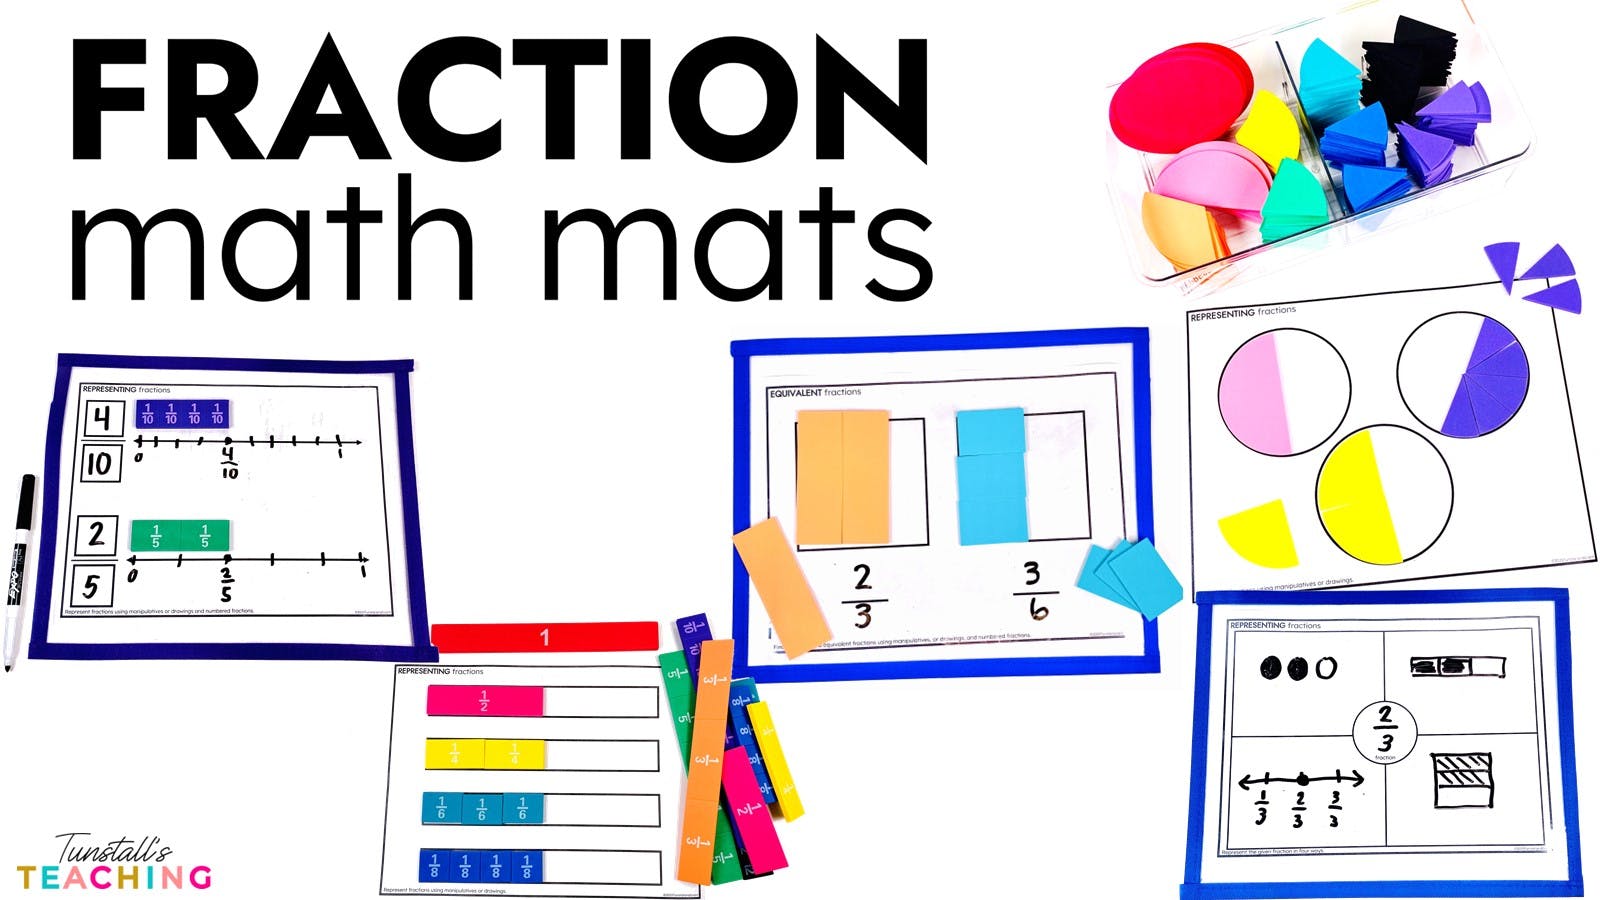 understanding fractions, k-5 teaching resources, math online teaching resources, tunstall's teaching, k-5 math learning